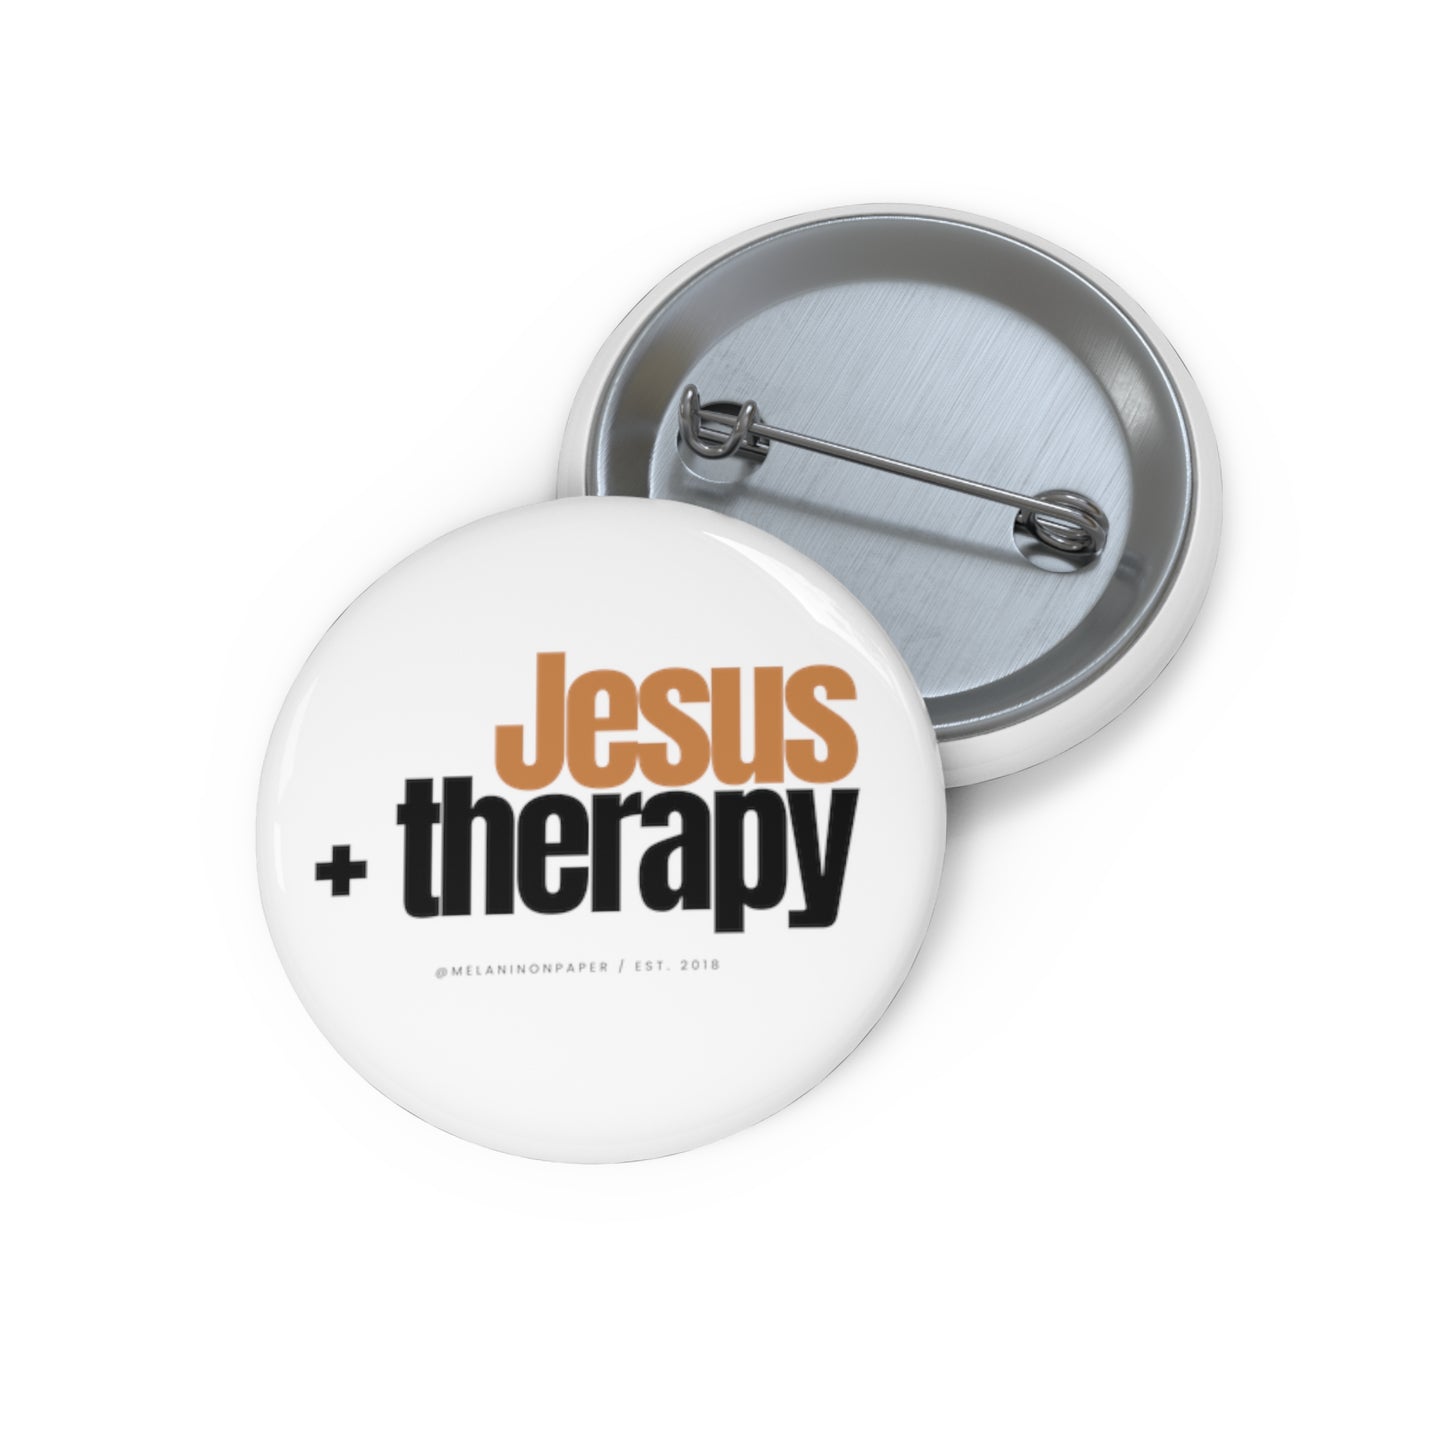 "Jesus + therapy" Pin Button - black & gold